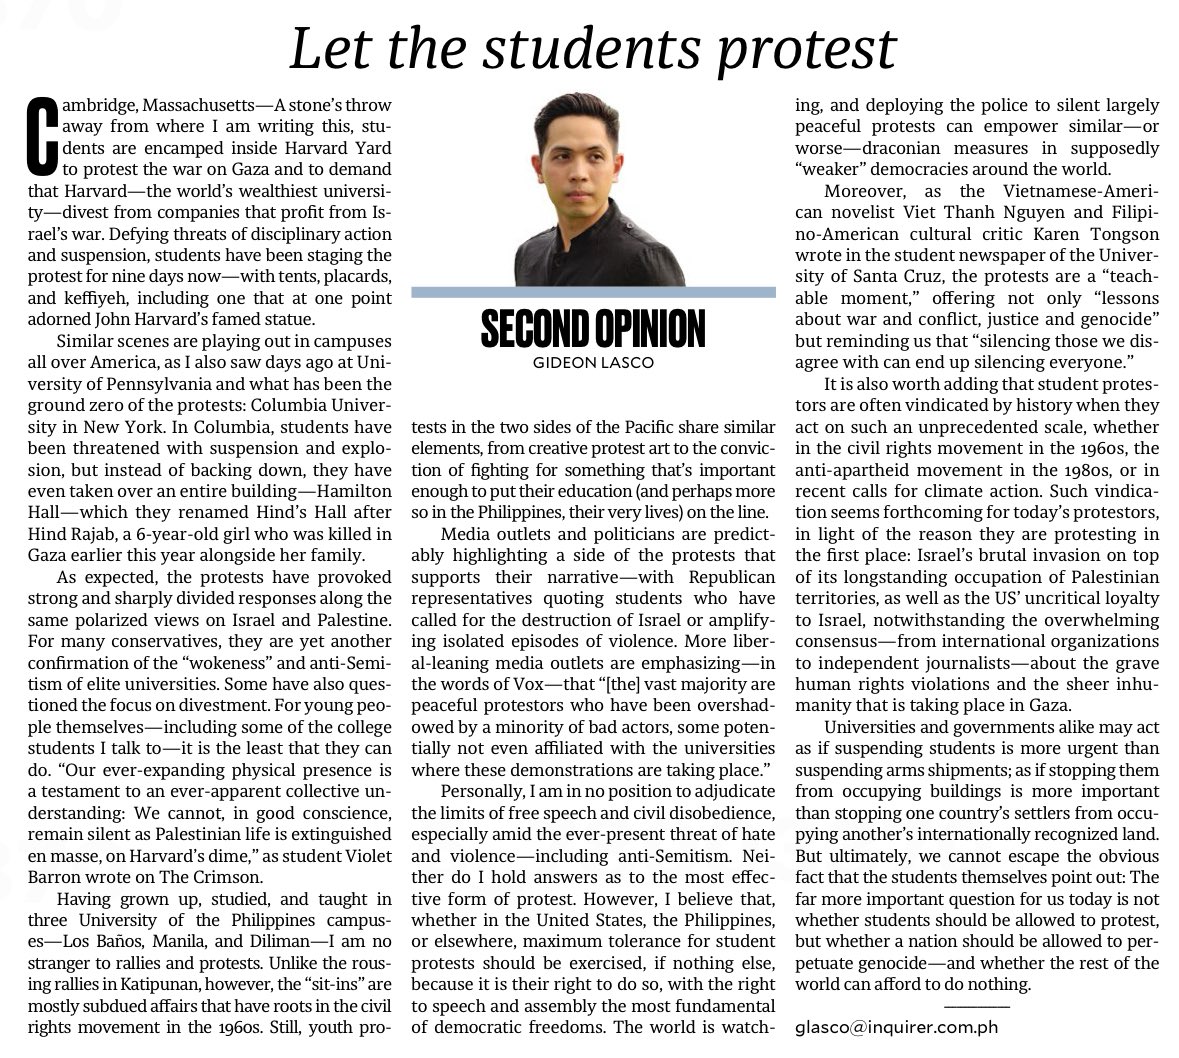 'The far more important question for us today is not whether students should be allowed to protest, but whether a nation should be allowed to perpetuate genocide—and whether the rest of the world can afford to do nothing.'